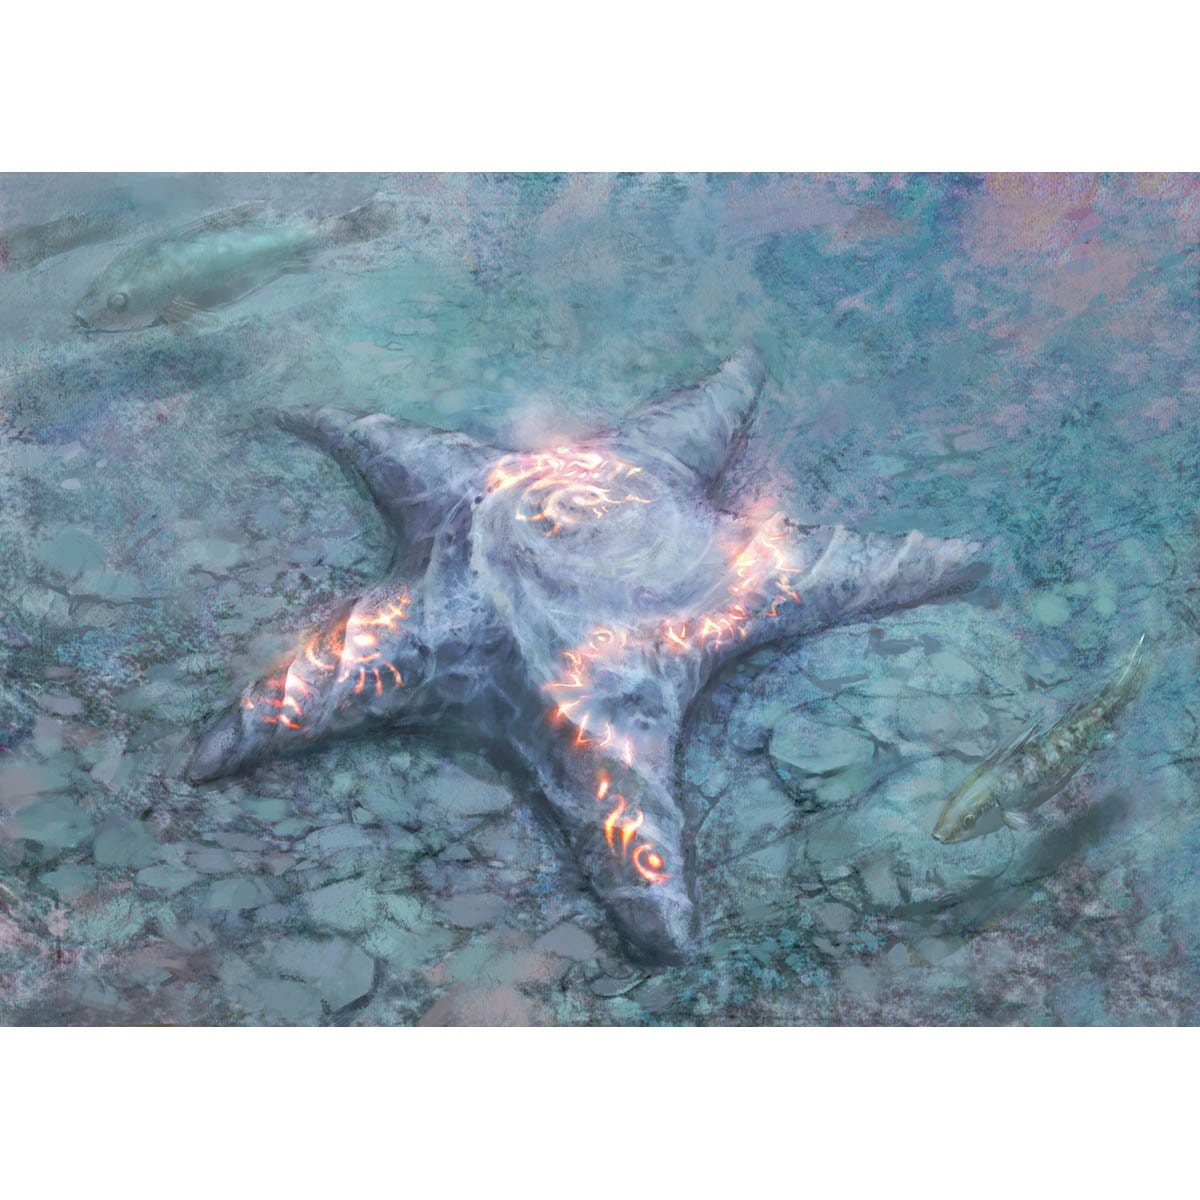 Sigiled Starfish Print - Print - Original Magic Art - Accessories for Magic the Gathering and other card games